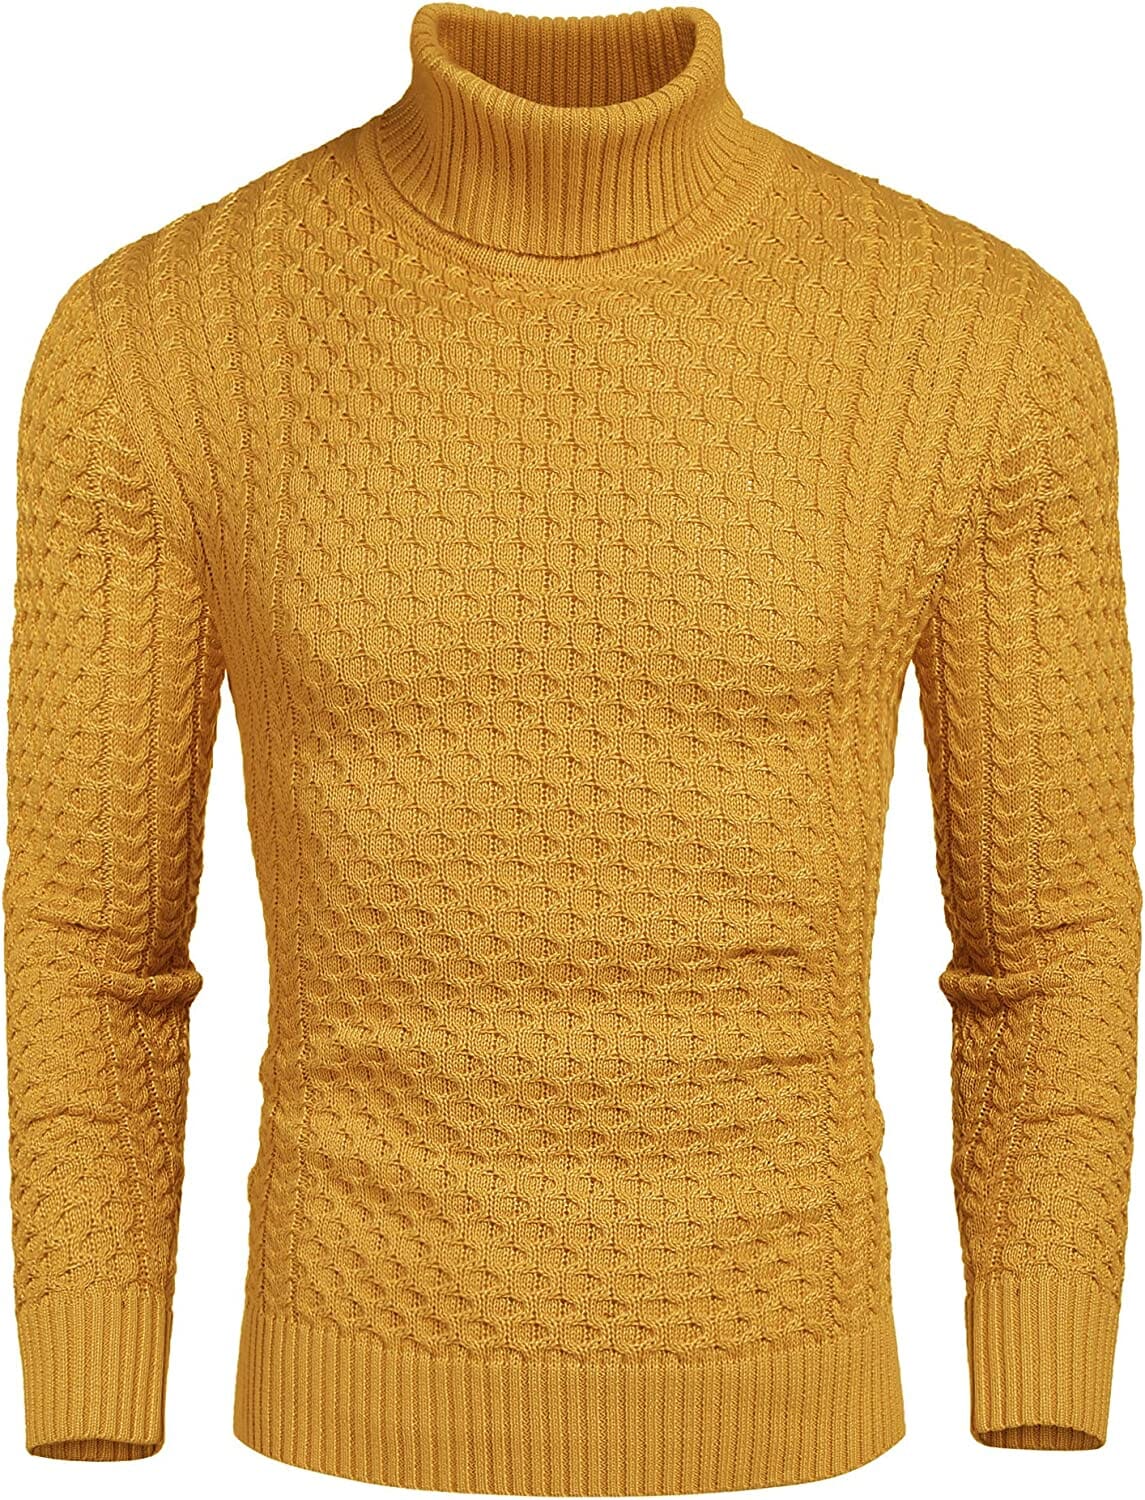 Slim Fit Turtleneck Twisted Sweater (US Only) Sweaters Coofandy's Yellow S 